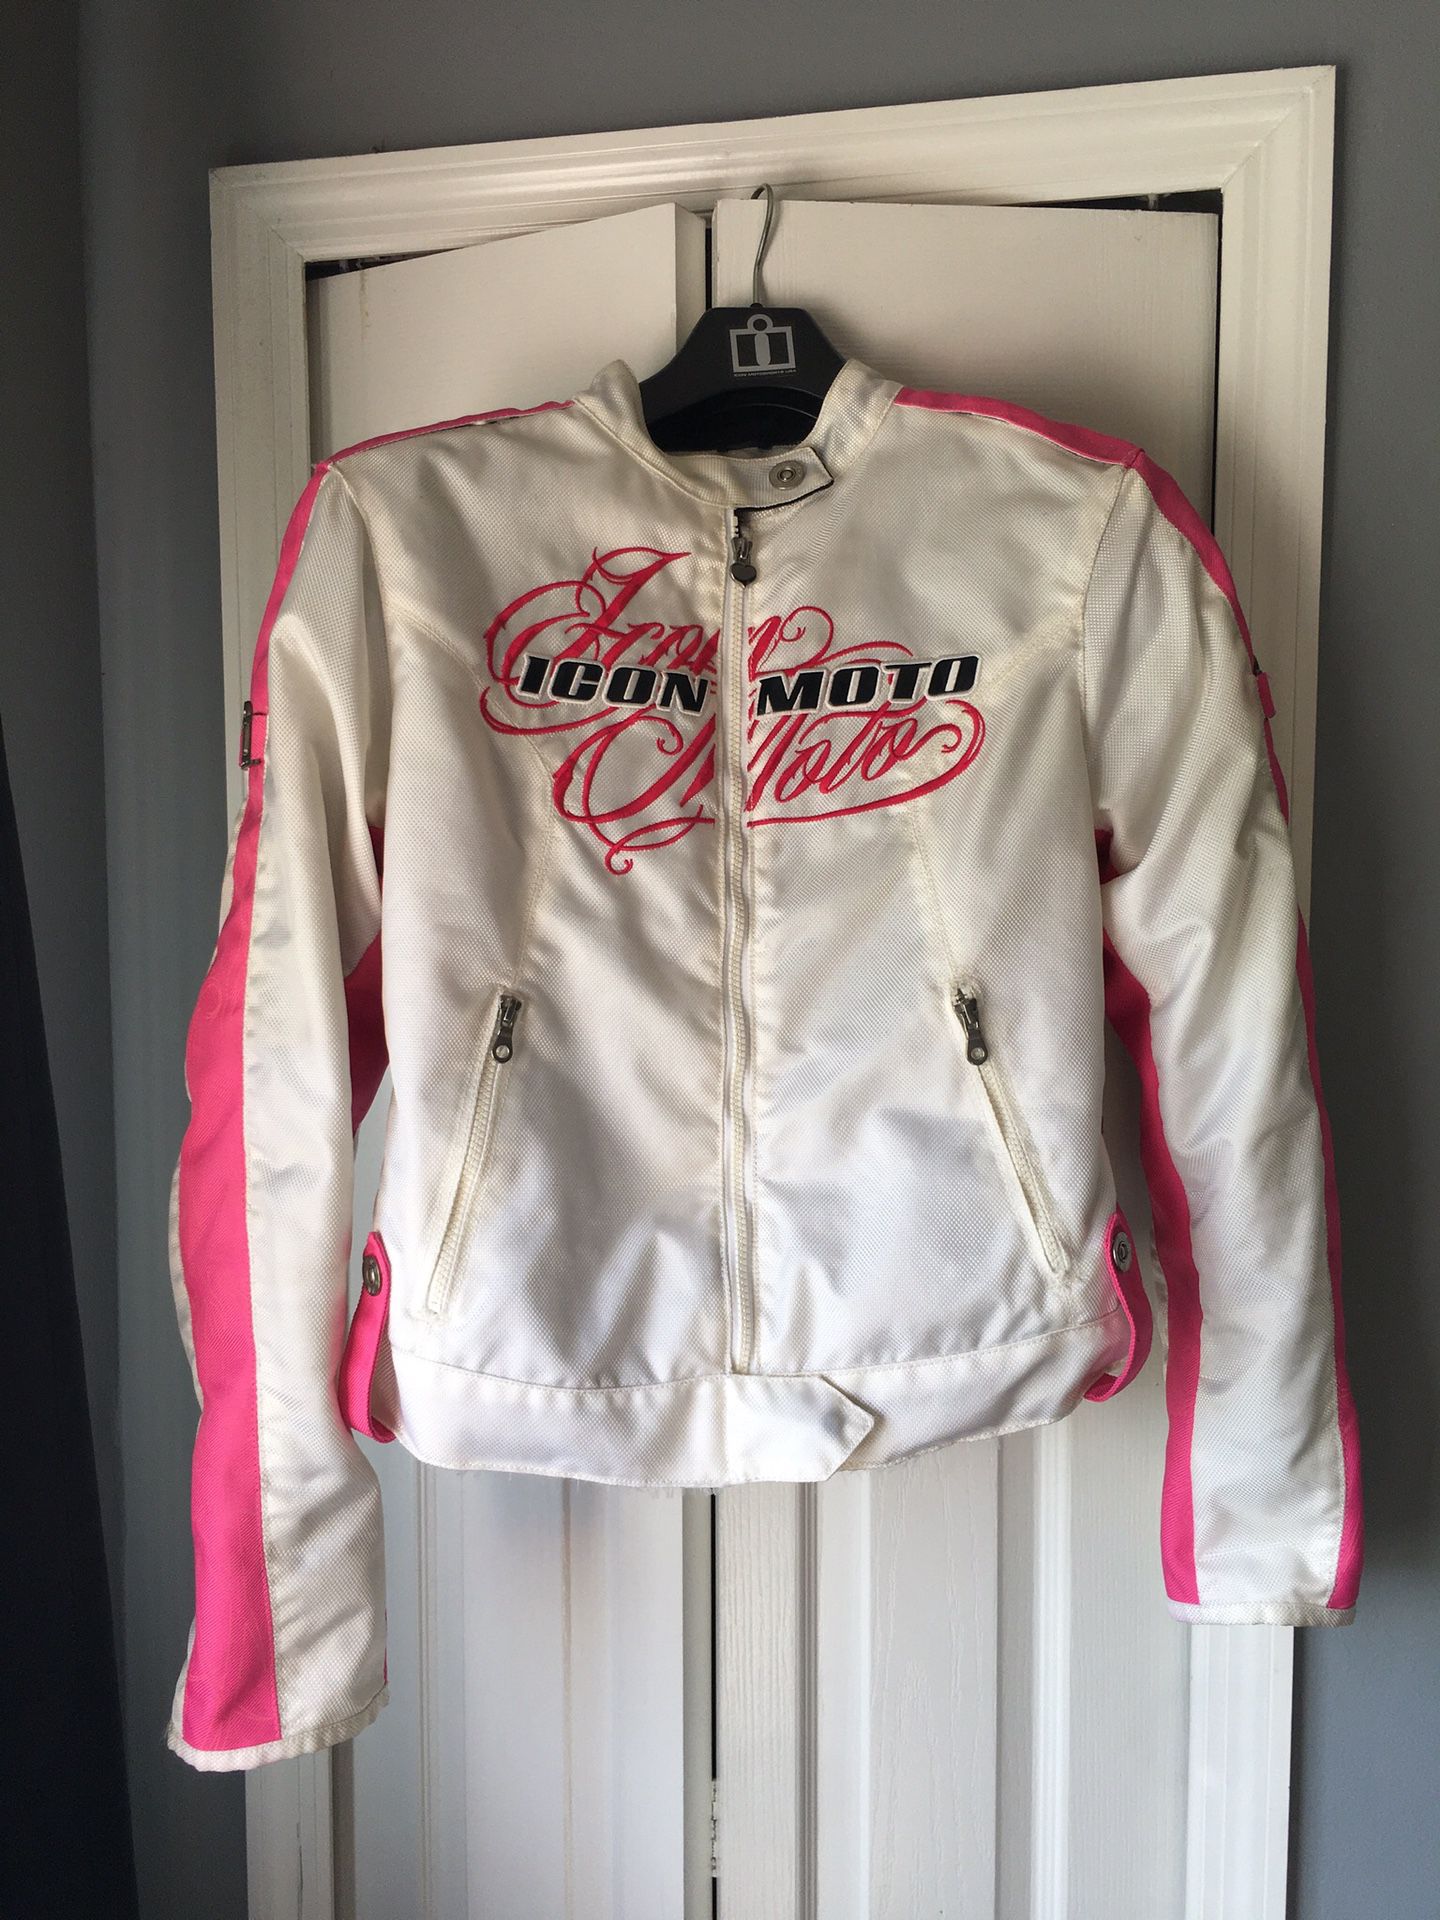 Female Icon Street Ángel Motorcycle Jacket Size: Large. Has zip in liner, built in shoulder, elbow and spine protection